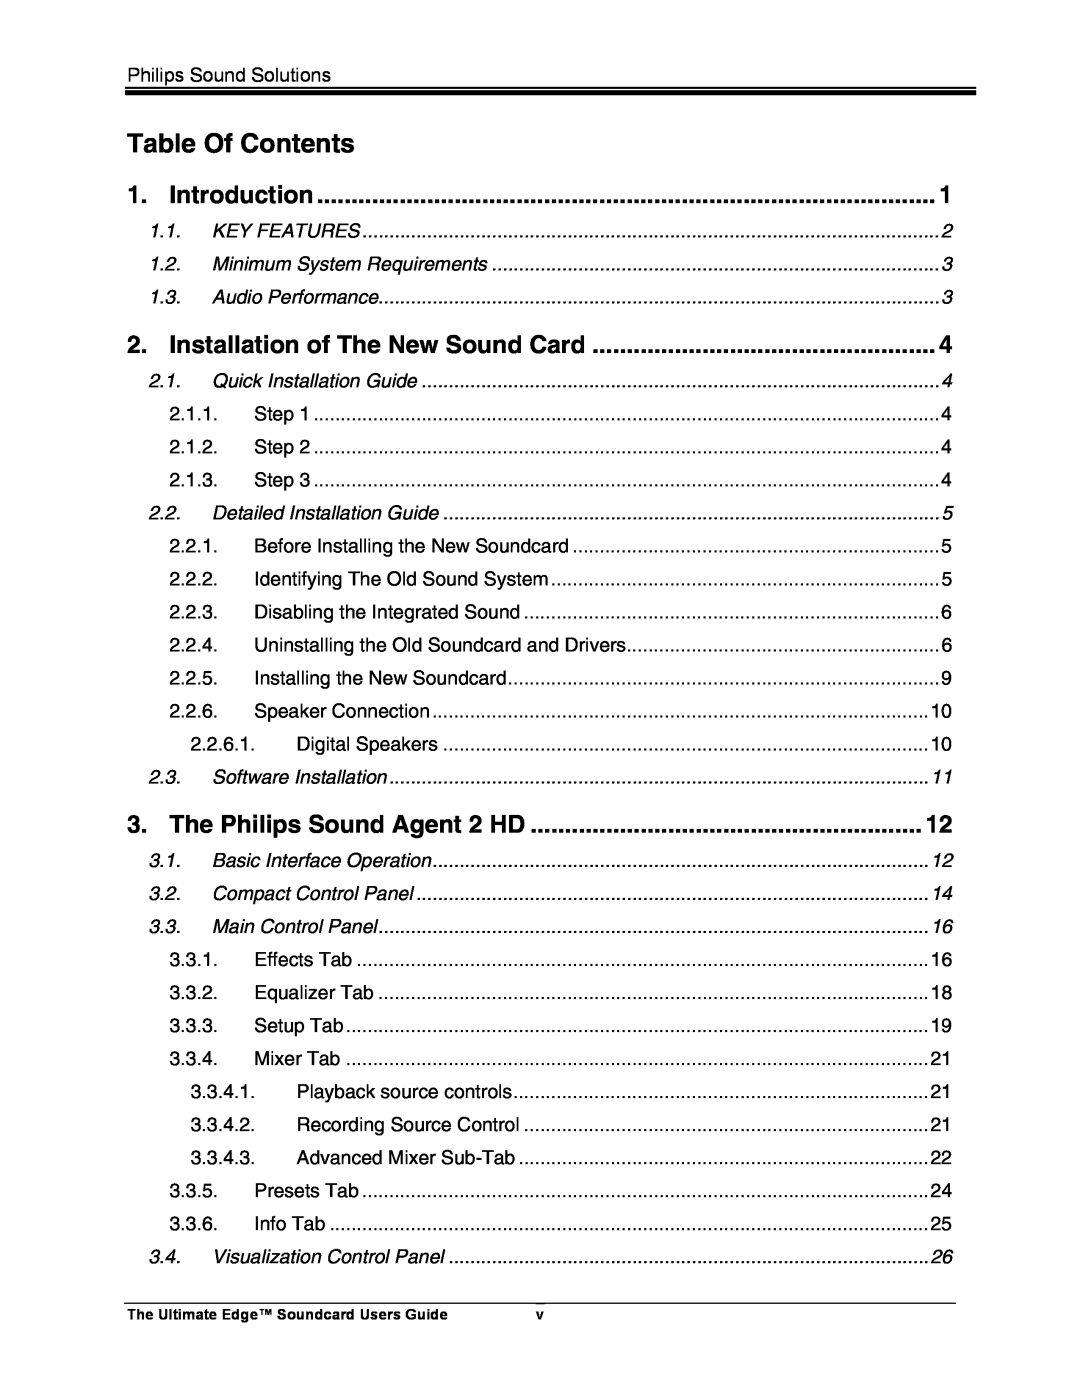 Philips 5.1 manual Introduction, Installation of The New Sound Card, The Philips Sound Agent 2 HD, Table Of Contents 